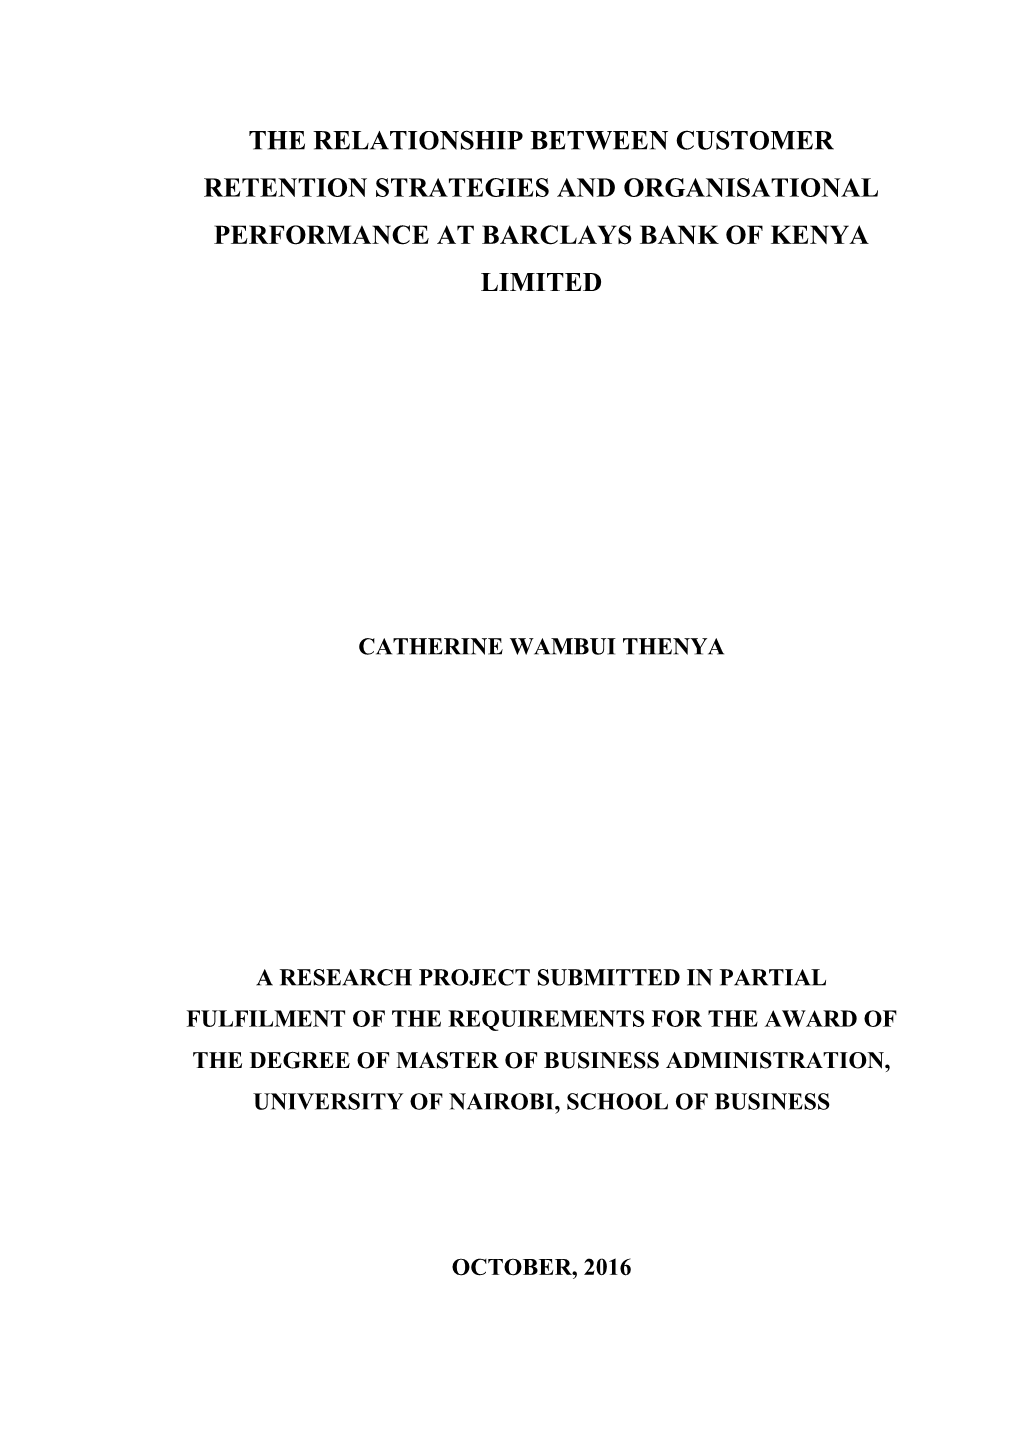 The Relationship Between Customer Retention Strategies and Organisational Performance at Barclays Bank of Kenya Limited